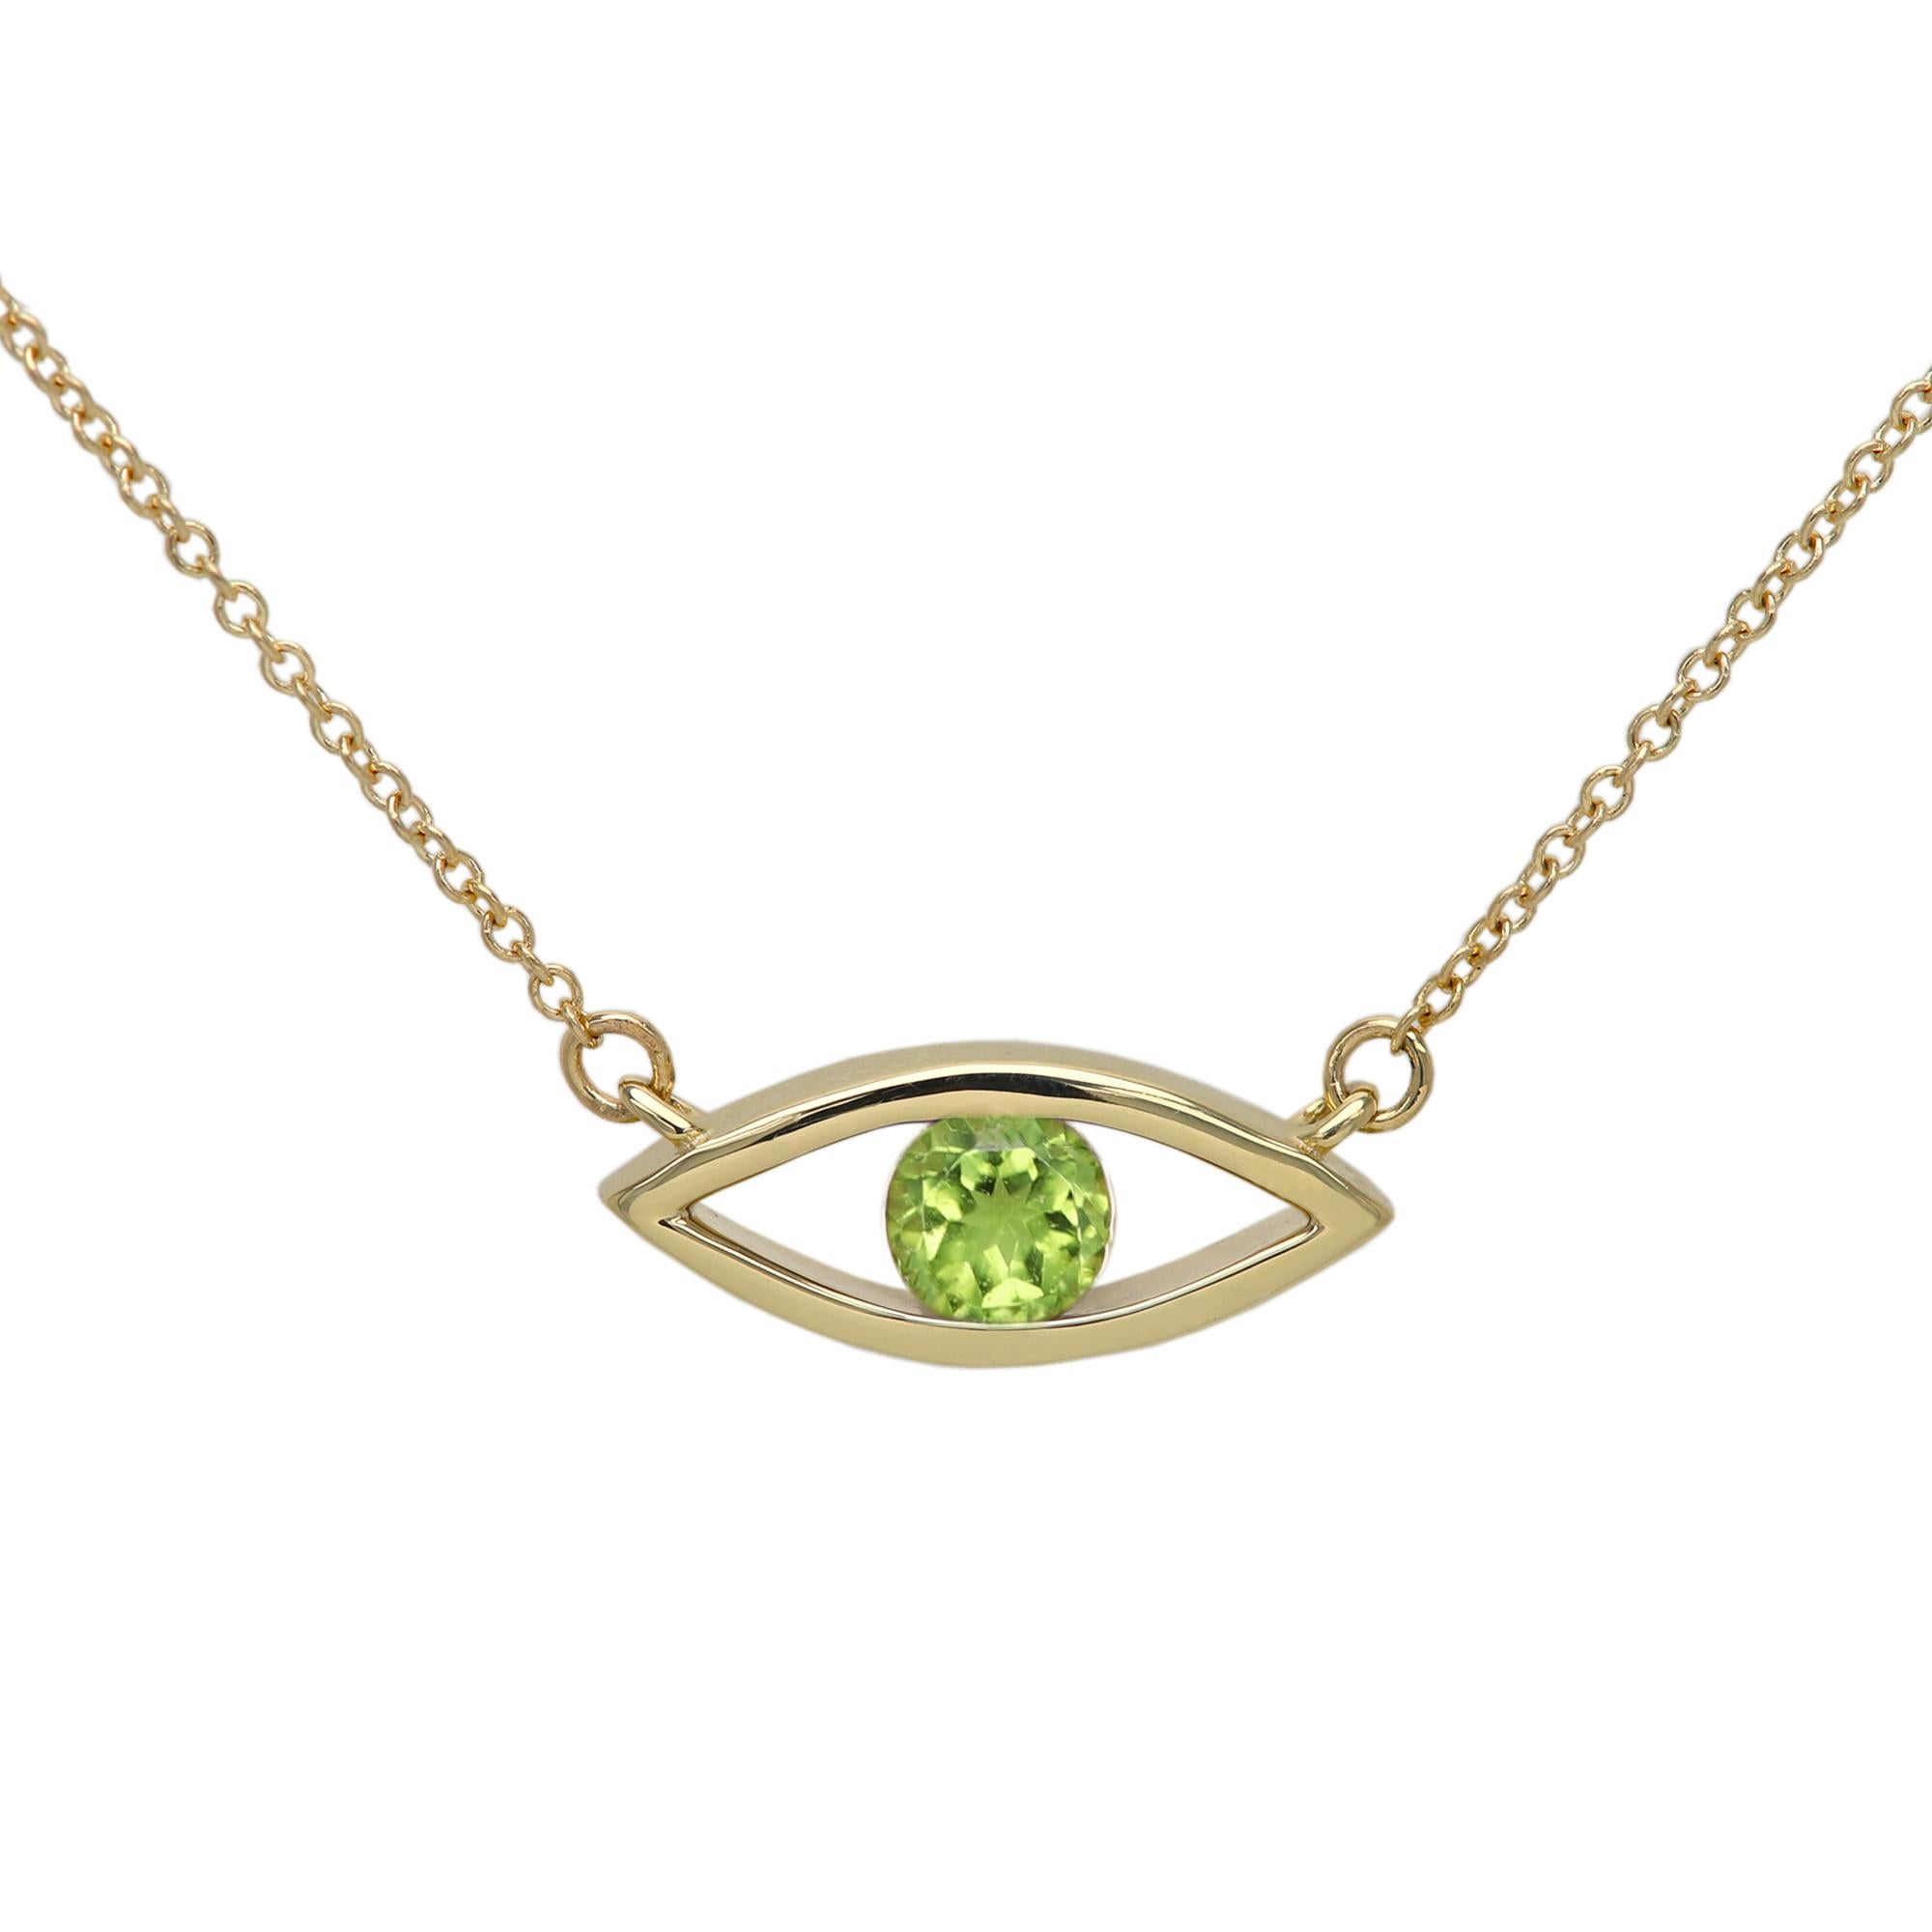 New, Very Elegant & Lovely Evil Eye Birthstone Necklace Solid 14k Yellow Gold with Natural peridot gemstone 
Set in Yellow Gold Evil Eye - Good Luck & protection Necklace
Classic Cable Chain and Lobster Lock - all 14k, 
Chain Length - as your own